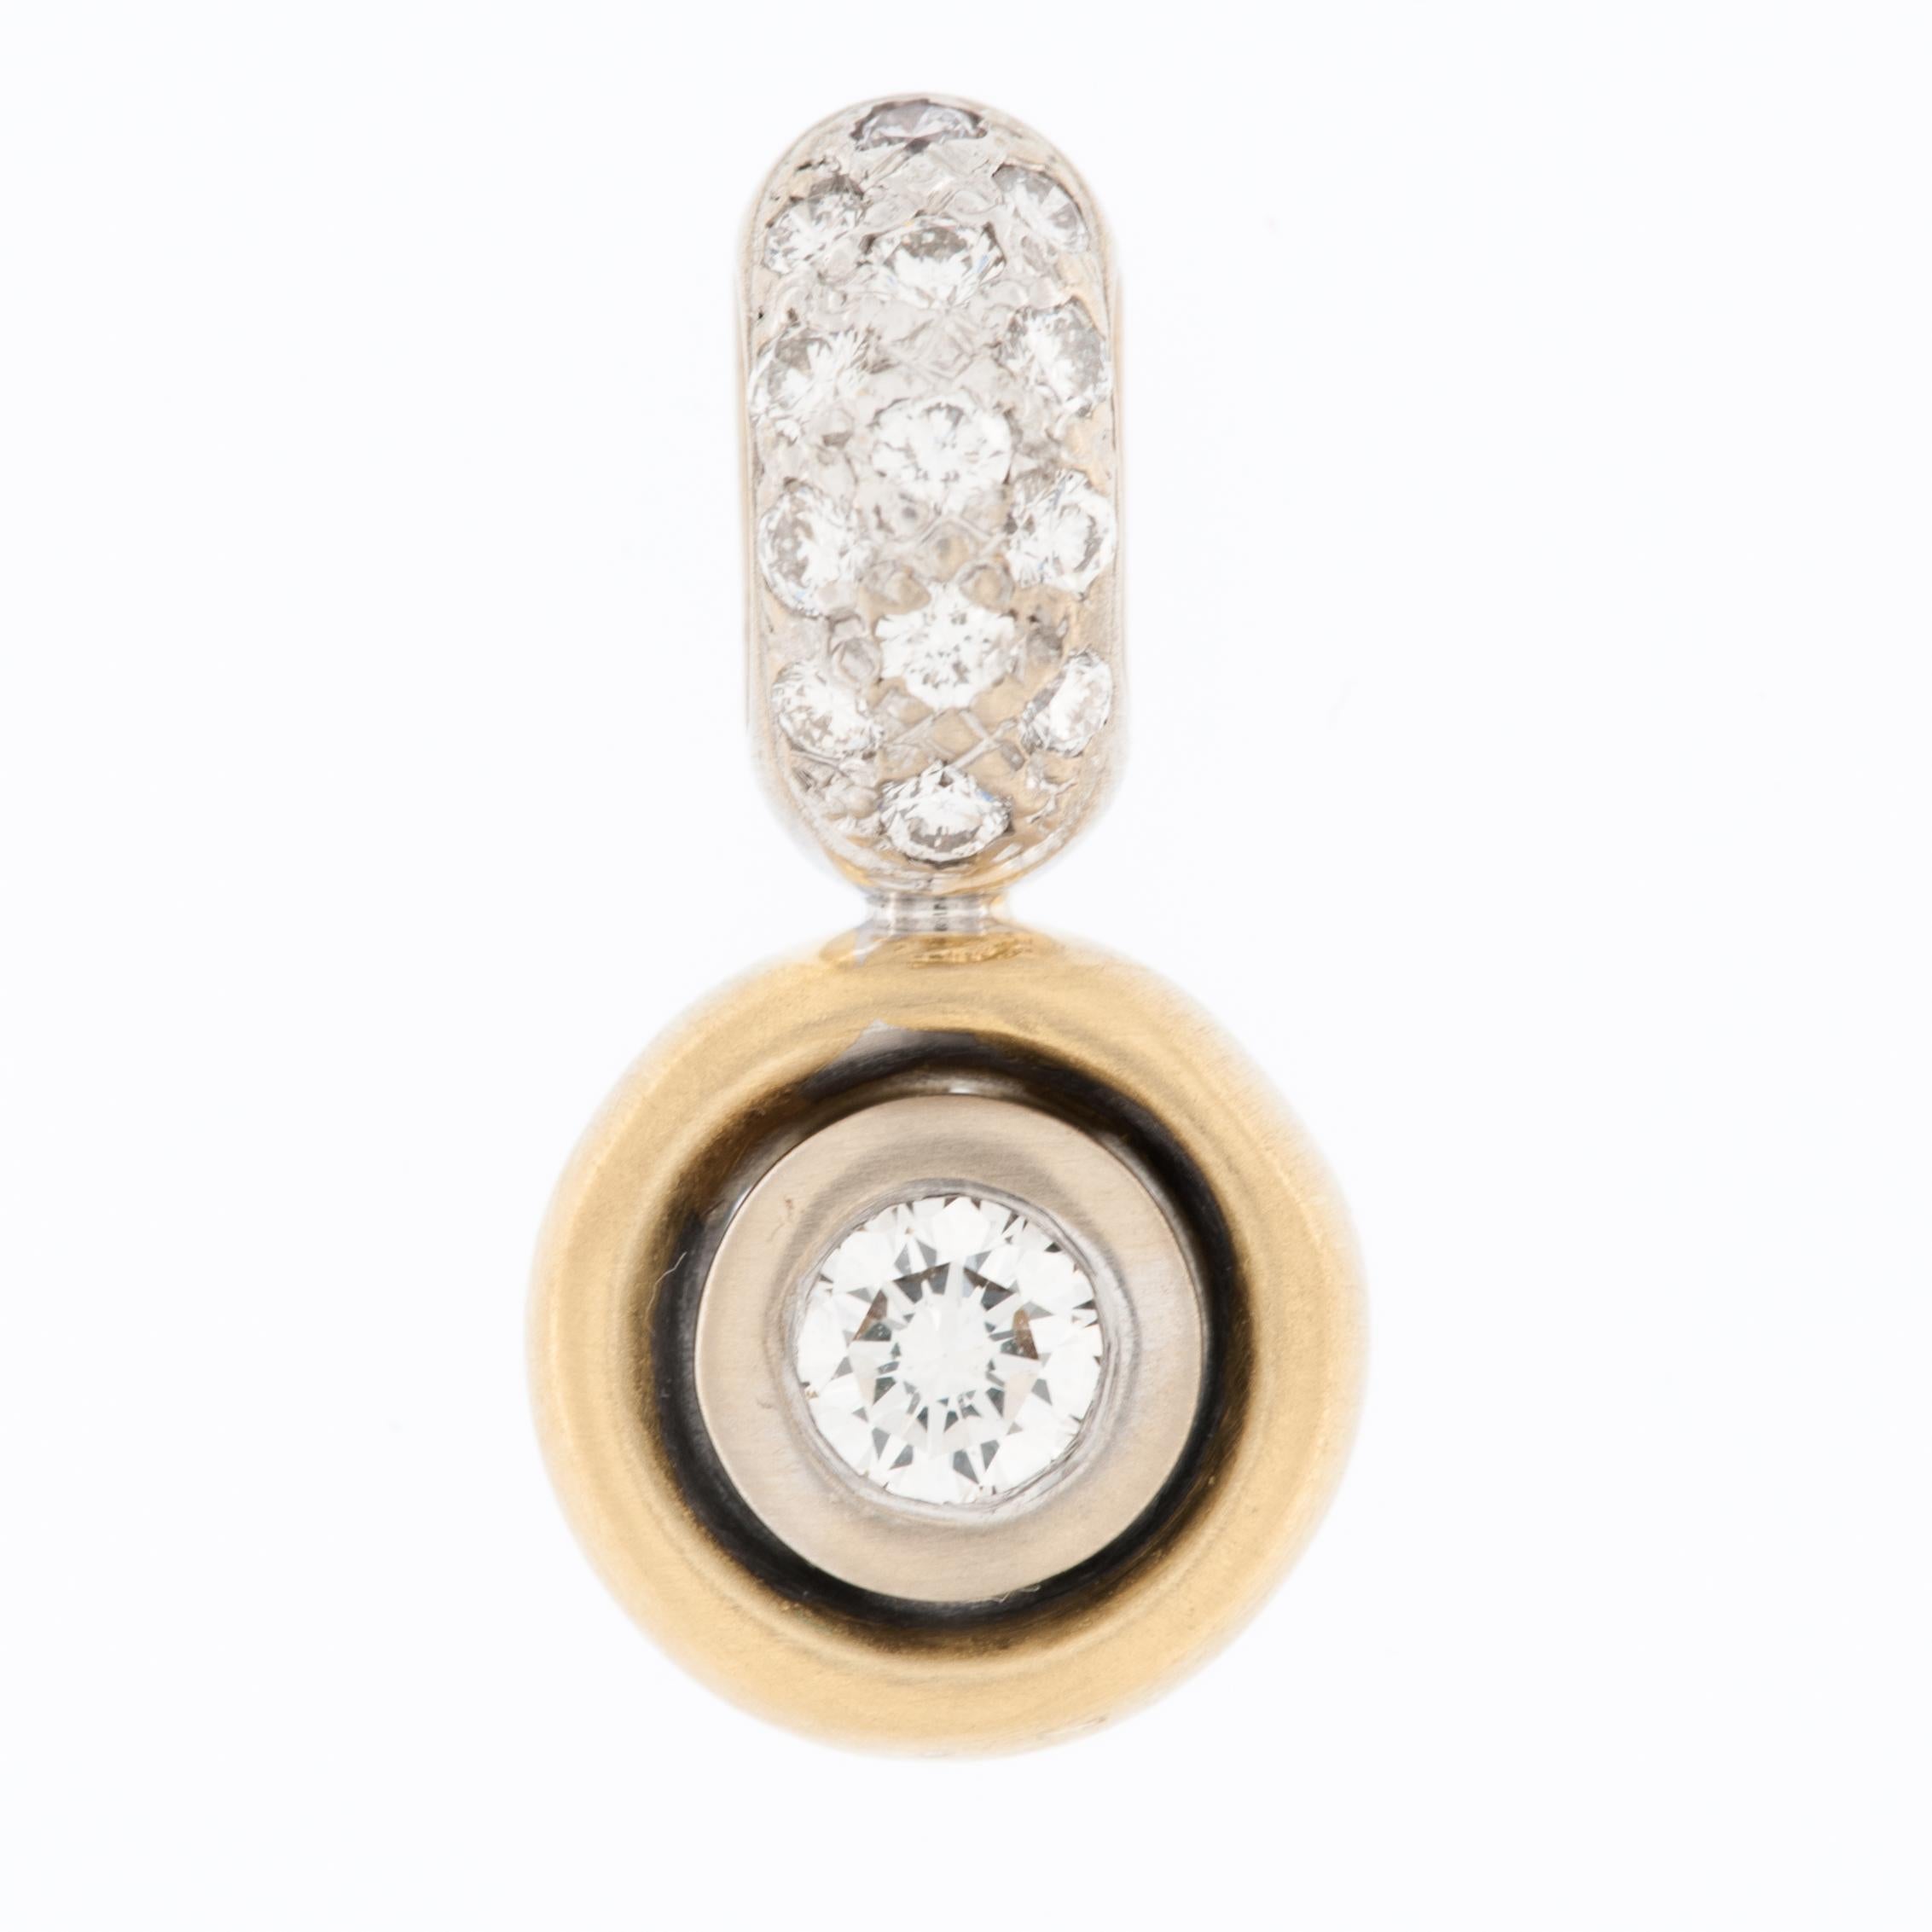 The Vintage Swiss 18kt Gold Pendant with Diamonds is a captivating piece of jewelry that exudes charm and sophistication.

The pendant is meticulously crafted from high-quality 18-karat yellow and white gold, showcasing the rich and warm tones that